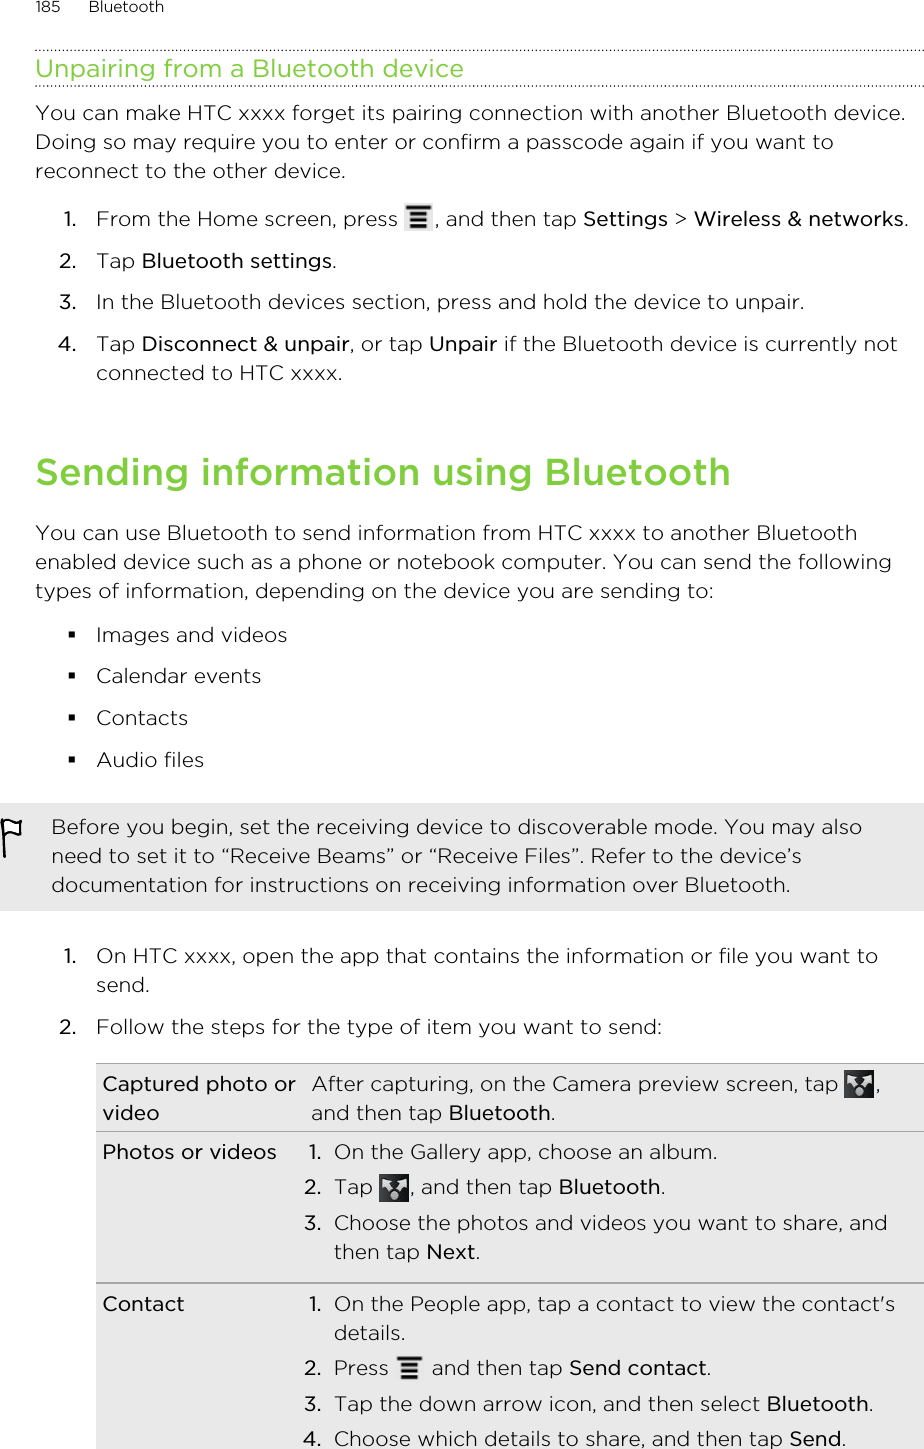 Unpairing from a Bluetooth deviceYou can make HTC xxxx forget its pairing connection with another Bluetooth device.Doing so may require you to enter or confirm a passcode again if you want toreconnect to the other device.1. From the Home screen, press  , and then tap Settings &gt; Wireless &amp; networks.2. Tap Bluetooth settings.3. In the Bluetooth devices section, press and hold the device to unpair.4. Tap Disconnect &amp; unpair, or tap Unpair if the Bluetooth device is currently notconnected to HTC xxxx.Sending information using BluetoothYou can use Bluetooth to send information from HTC xxxx to another Bluetoothenabled device such as a phone or notebook computer. You can send the followingtypes of information, depending on the device you are sending to:§Images and videos§Calendar events§Contacts§Audio filesBefore you begin, set the receiving device to discoverable mode. You may alsoneed to set it to “Receive Beams” or “Receive Files”. Refer to the device’sdocumentation for instructions on receiving information over Bluetooth.1. On HTC xxxx, open the app that contains the information or file you want tosend.2. Follow the steps for the type of item you want to send:Captured photo orvideoAfter capturing, on the Camera preview screen, tap  ,and then tap Bluetooth.Photos or videos 1. On the Gallery app, choose an album.2. Tap  , and then tap Bluetooth.3. Choose the photos and videos you want to share, andthen tap Next.Contact 1. On the People app, tap a contact to view the contact&apos;sdetails.2. Press   and then tap Send contact.3. Tap the down arrow icon, and then select Bluetooth.4. Choose which details to share, and then tap Send.185 Bluetooth